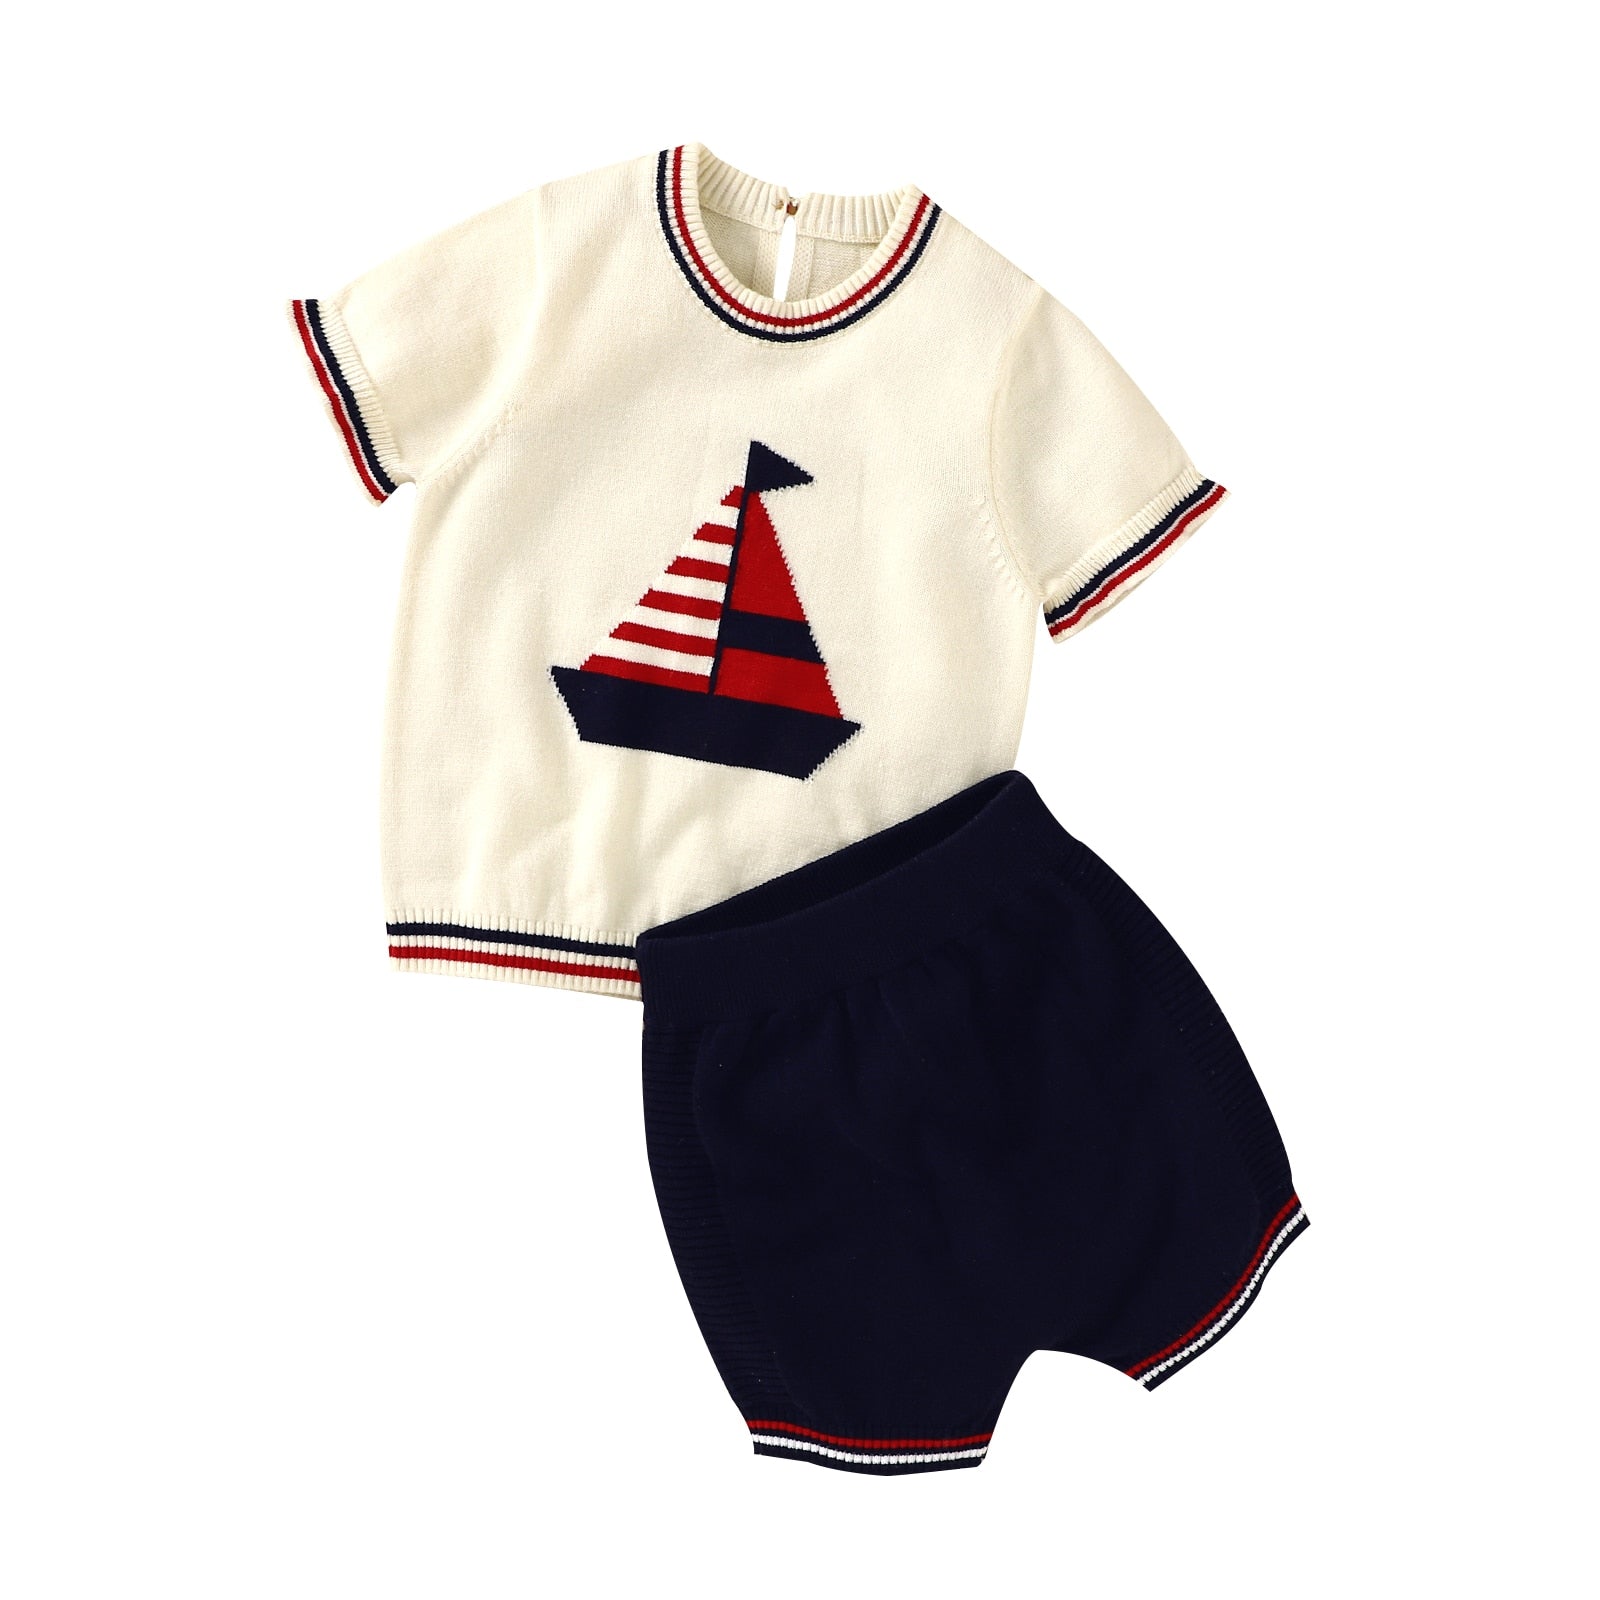 Oakley Bear Official Site - Newborn, Baby + Toddler Kid Clothes